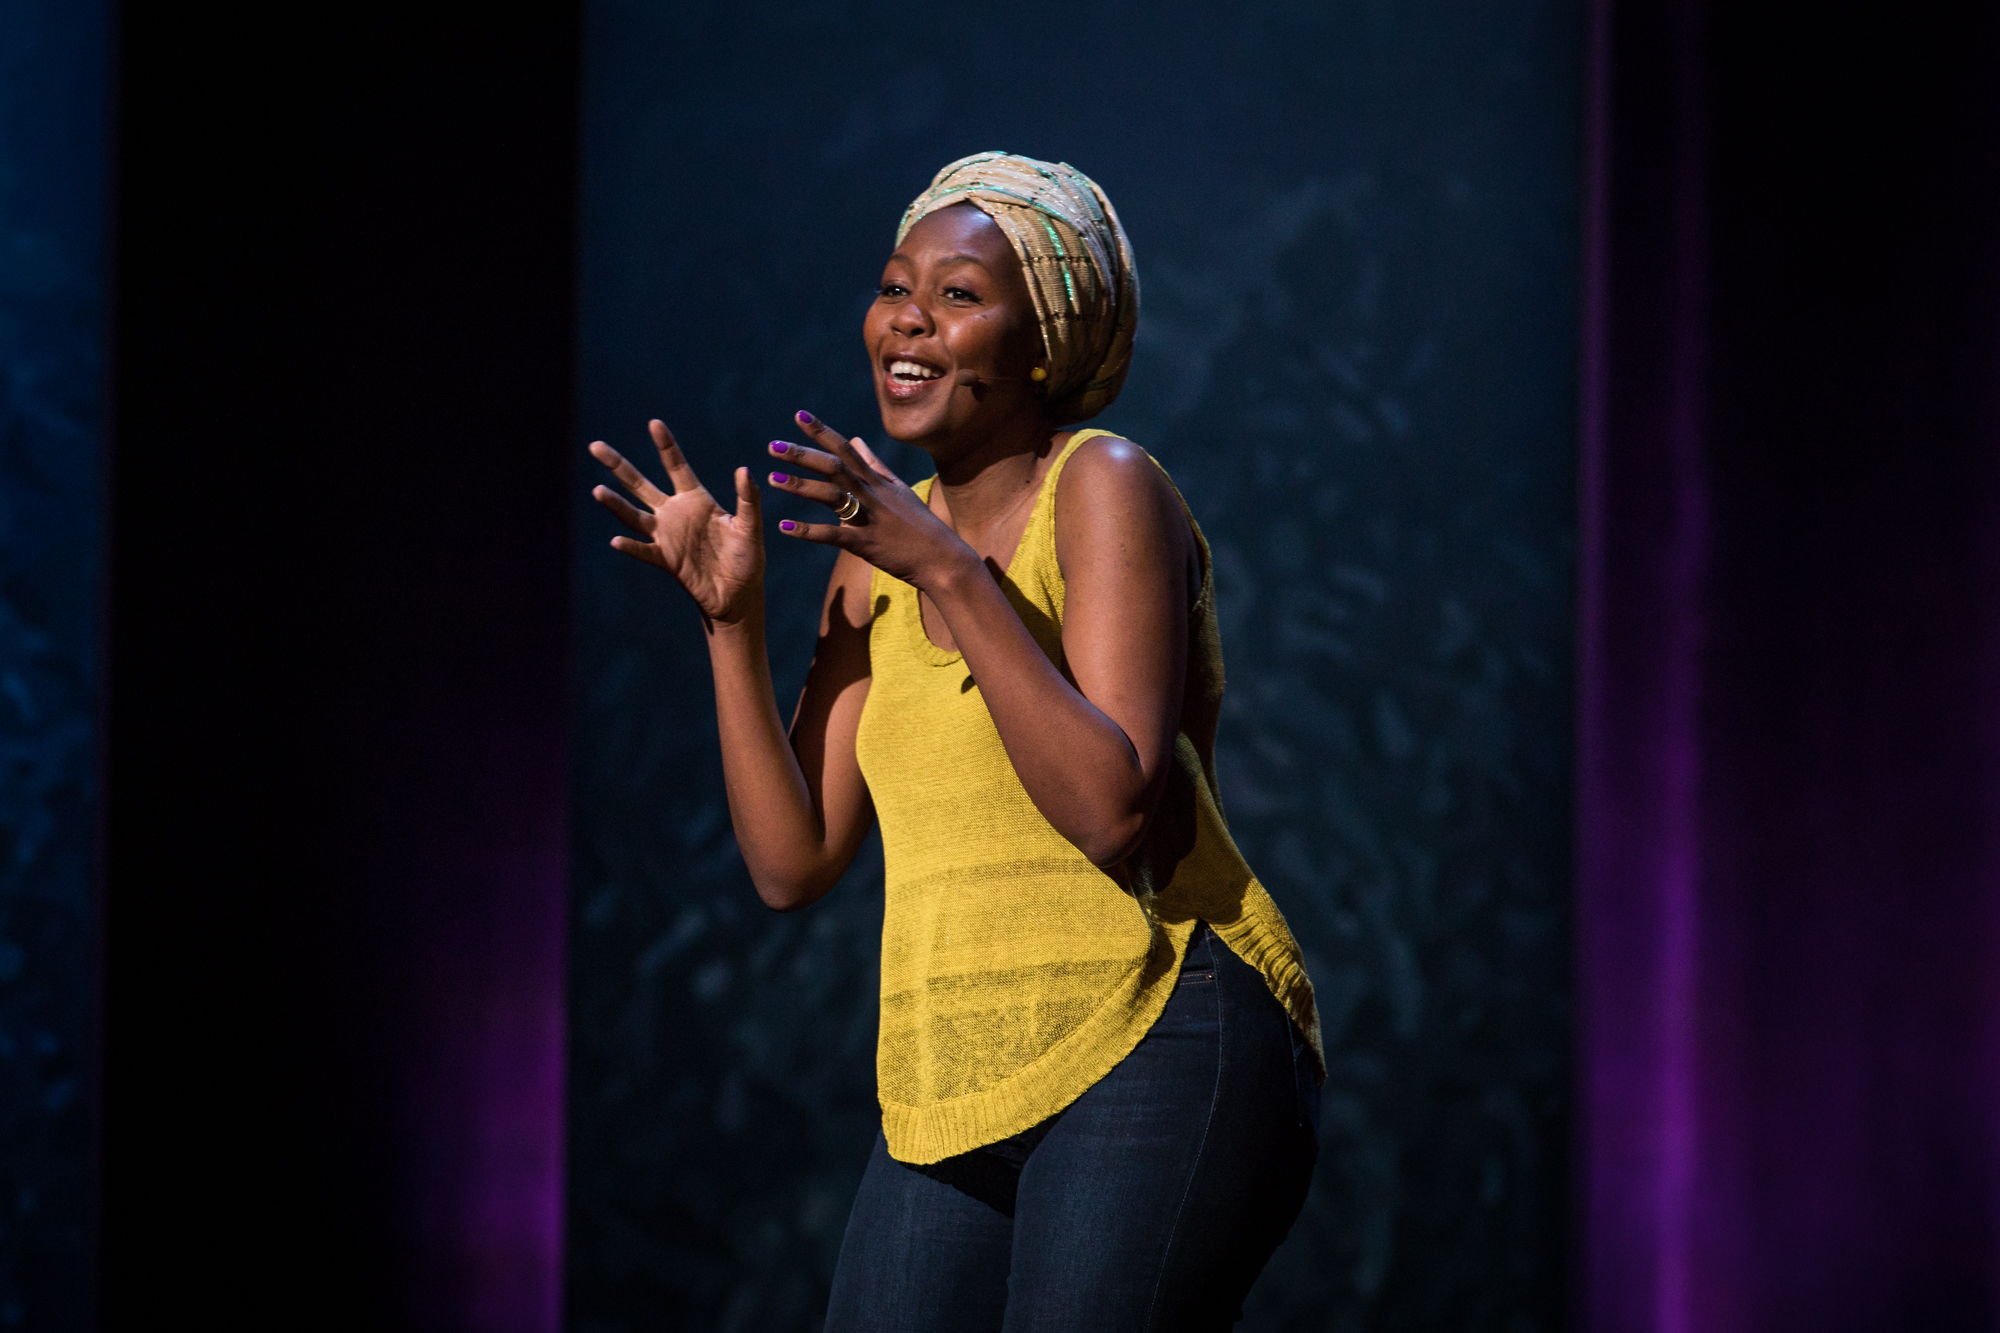 Sisonke Msimang at TEDWomen 2016 - It's About Time, October 26-28, 2016, Yerba Buena Centre for the Arts, San Francisco, California. Photo: Marla Aufmuth / TED